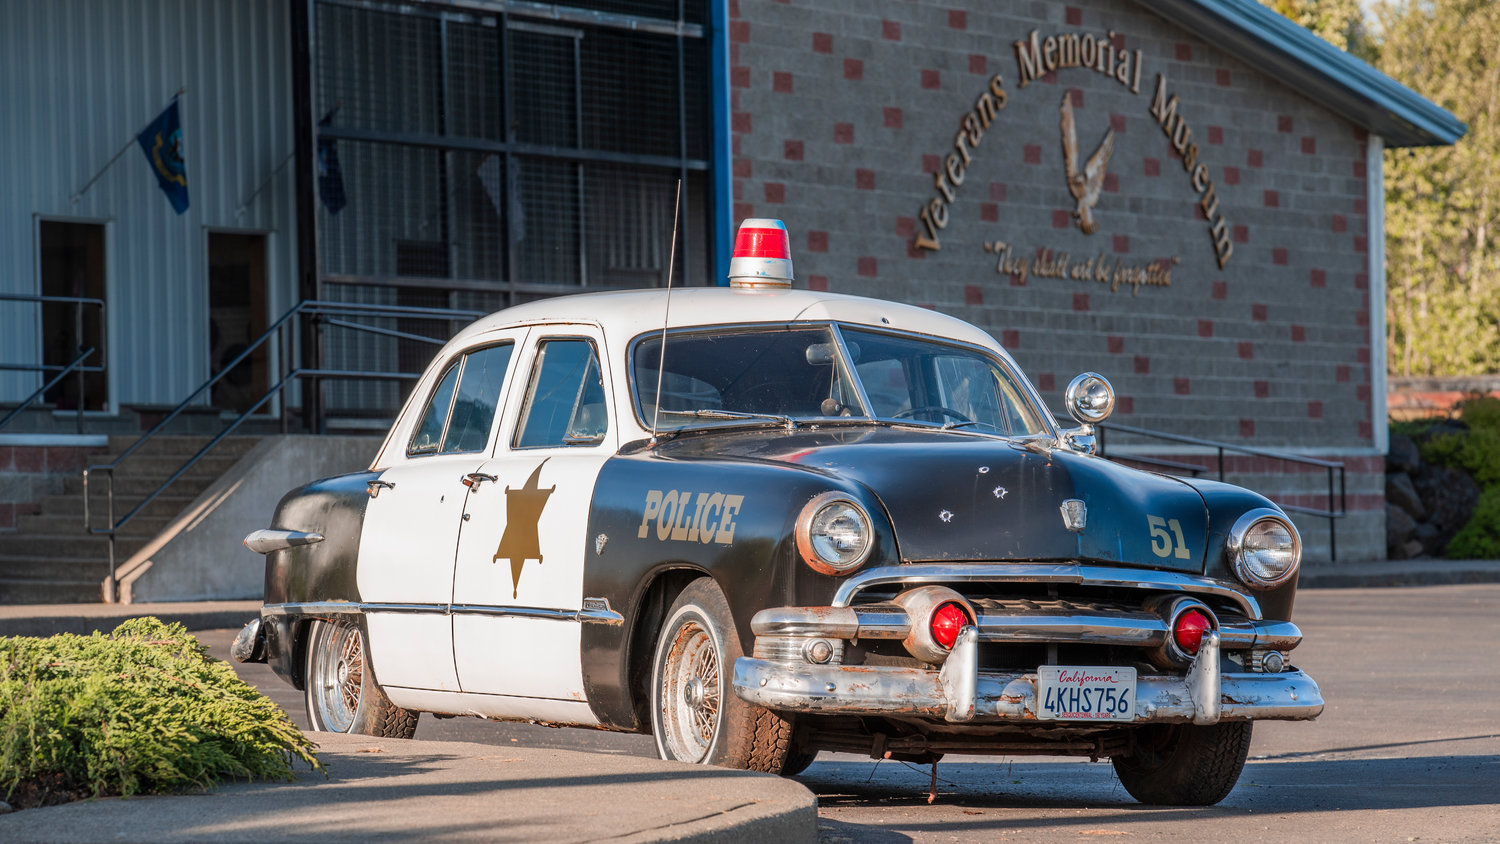 A vintage police car is seen parked outside the Veterans Memorial Museum on Saturday.